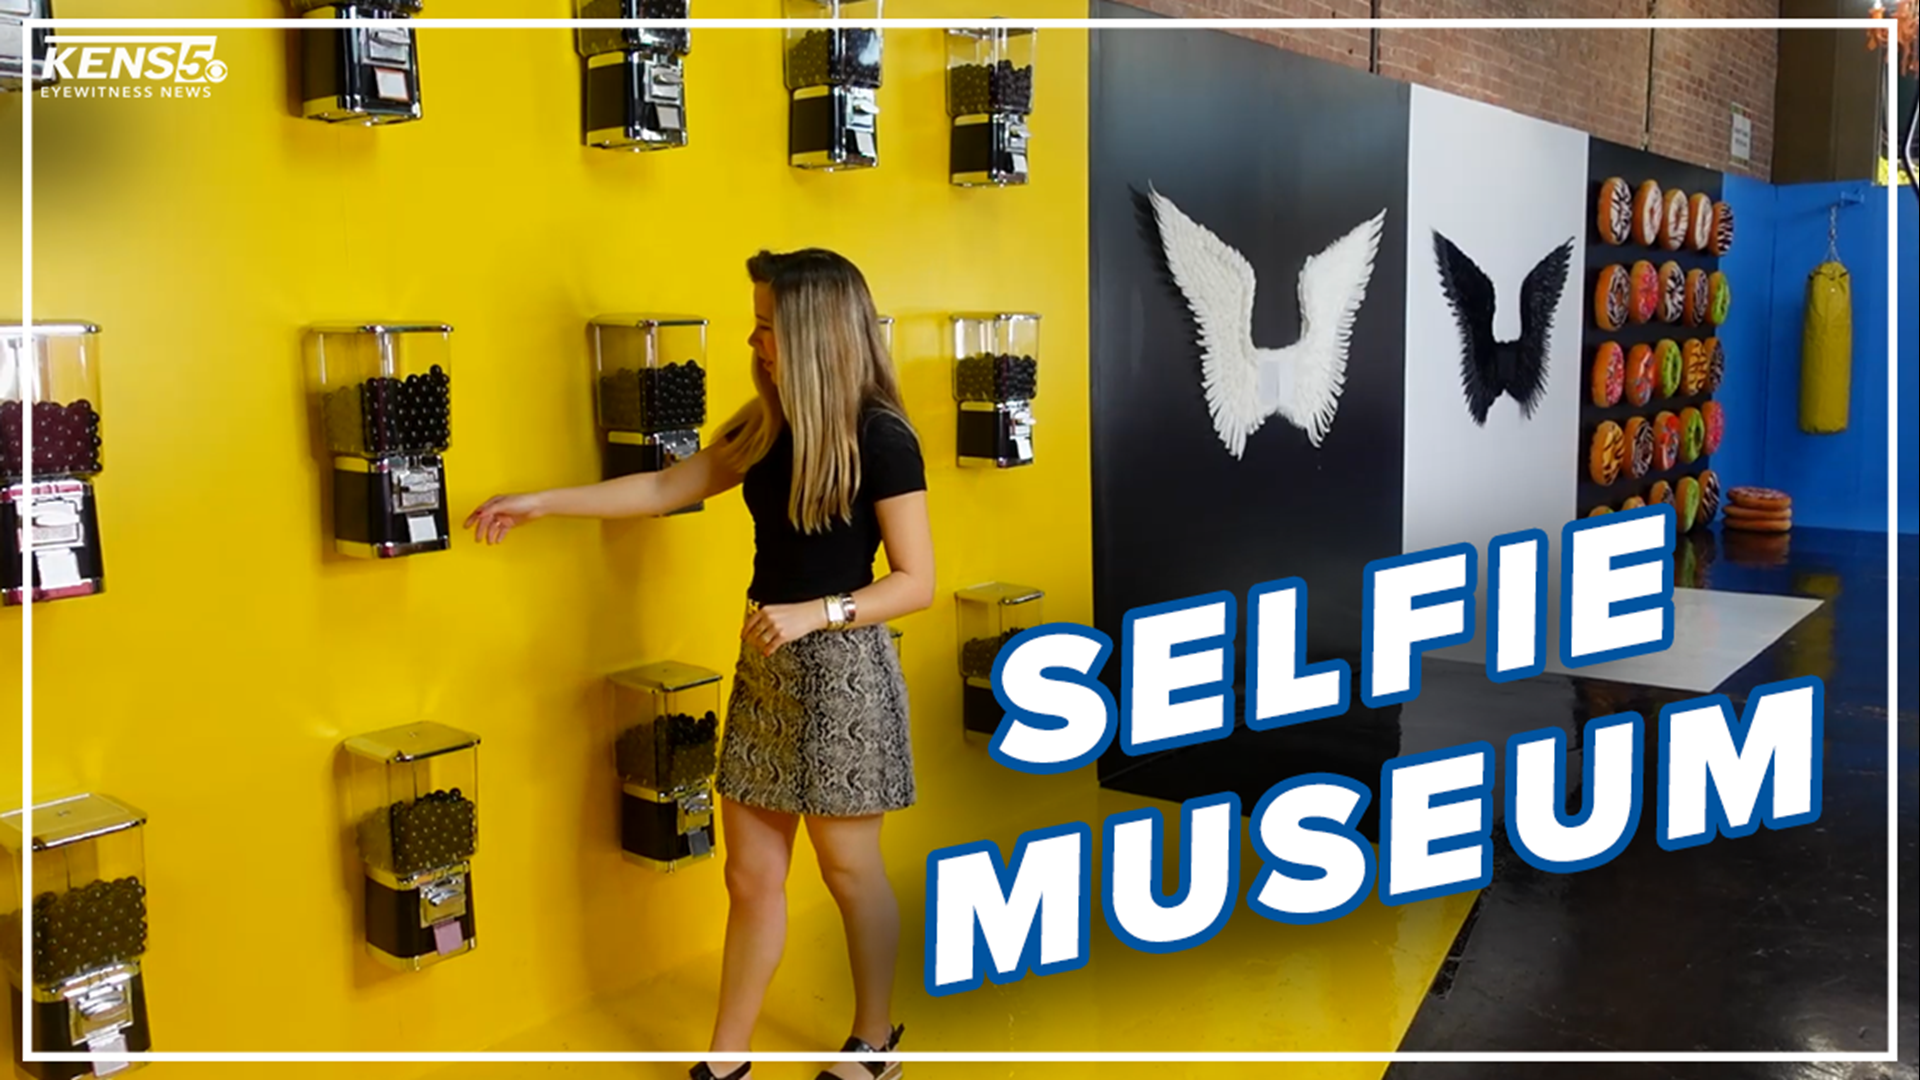 KENS 5's Lexi Hazlett goes inside the Texas Selfie Museum, a place full of professional lightning, colorful backgrounds and props to make your photos pop.